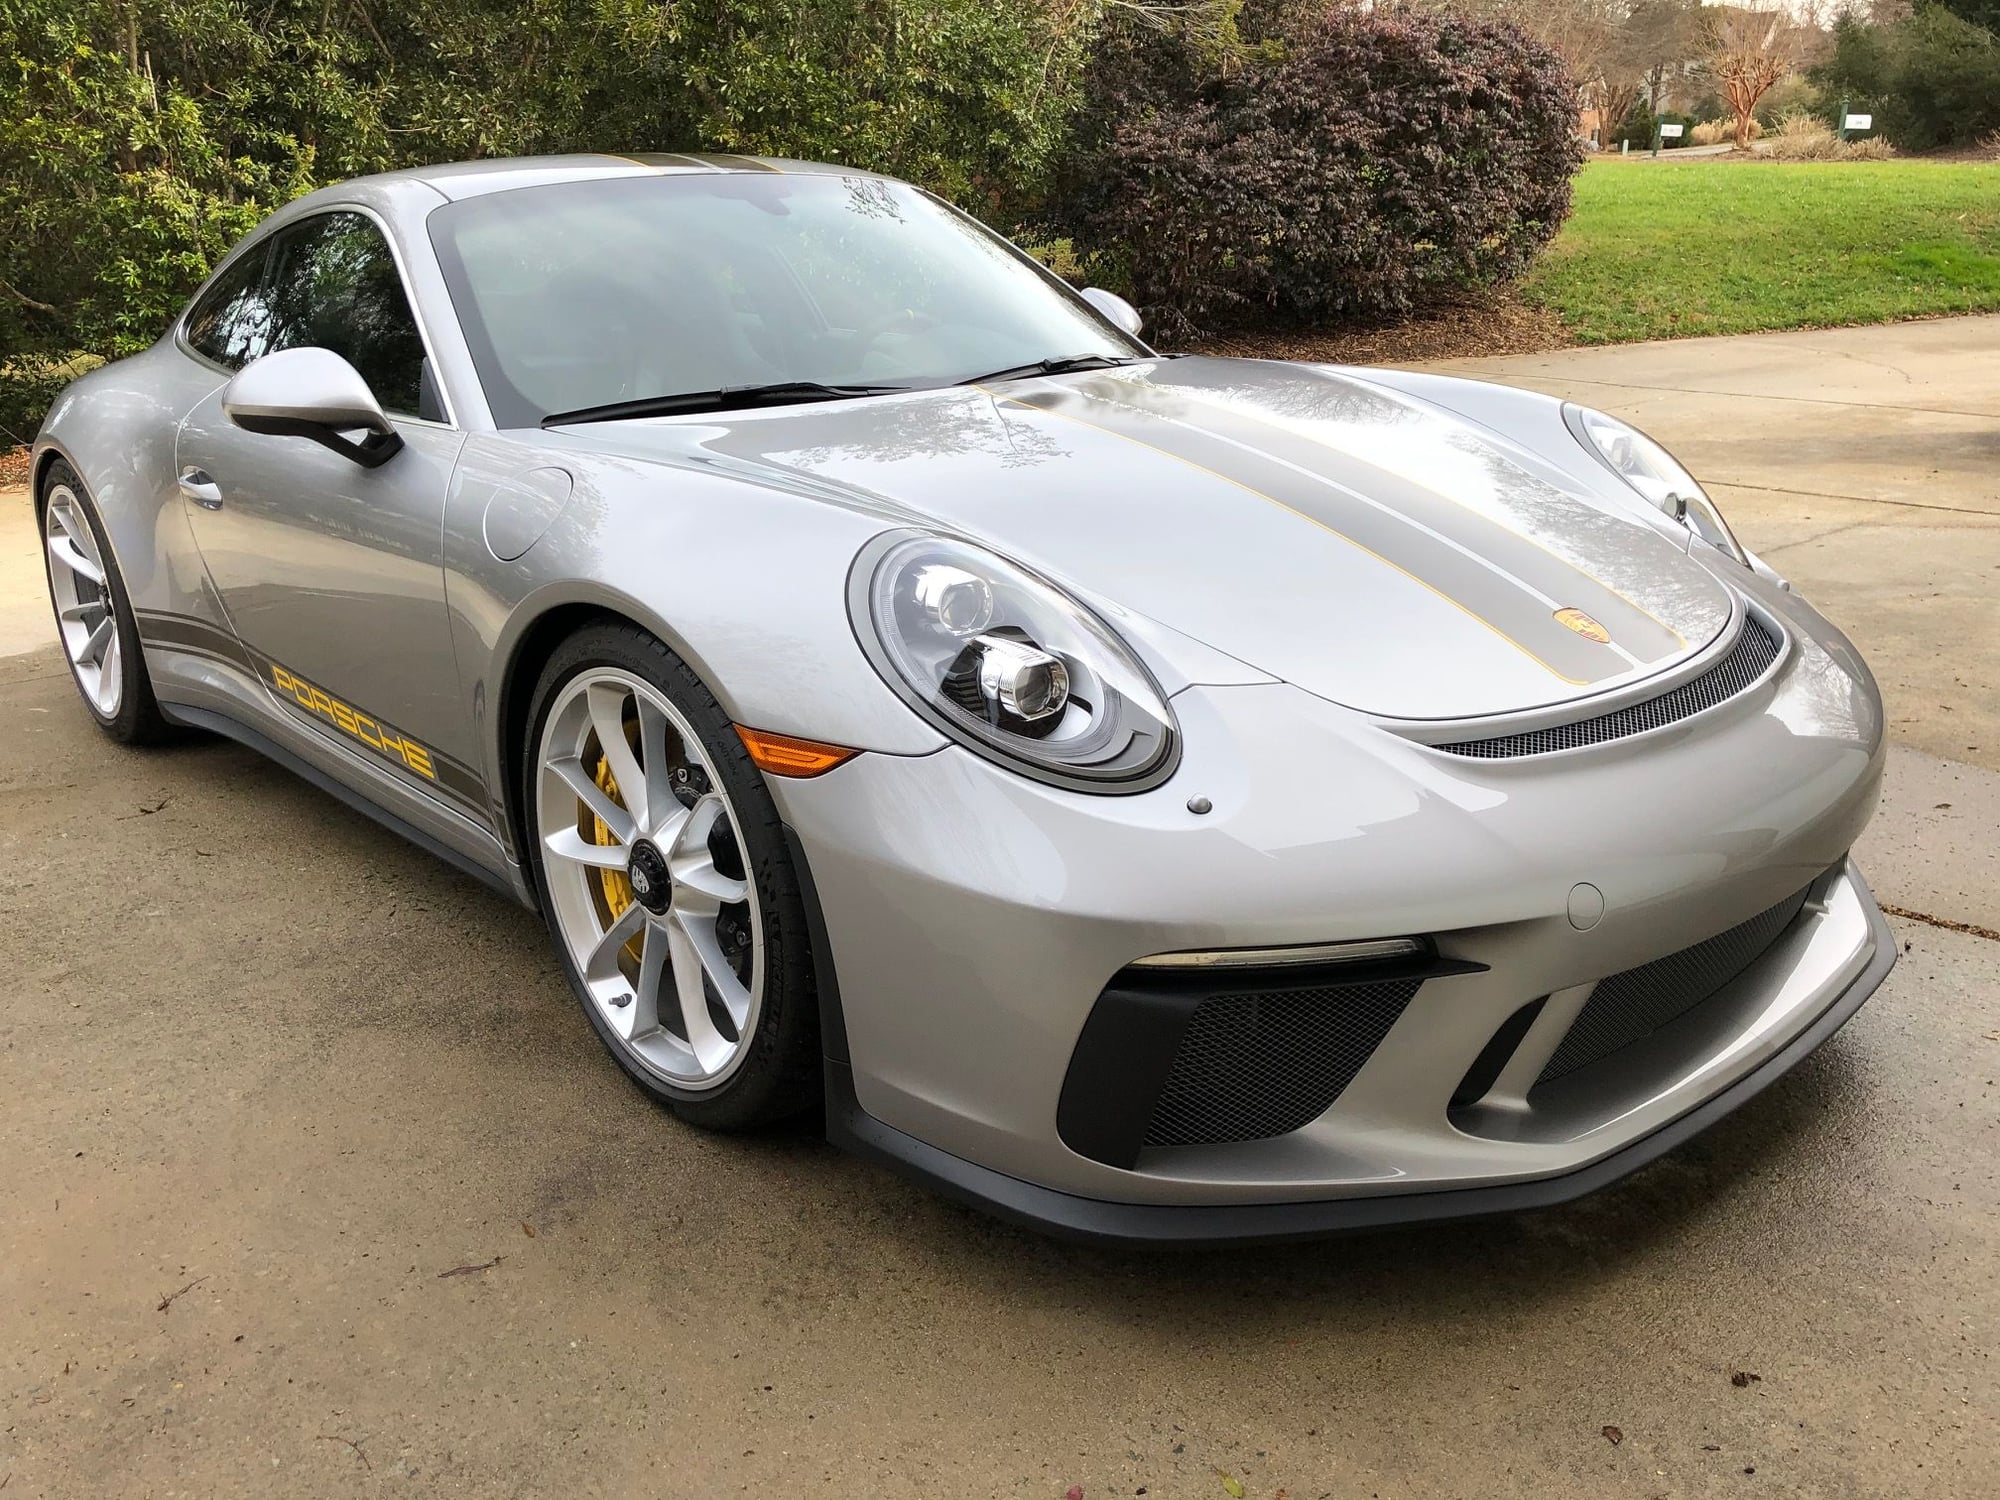 2018 Porsche GT3 - 2018 GT3 Touring - GT Silver -CPO - Used - VIN WP0AC2A95JS175547 - 1,940 Miles - Raleigh, NC 27609, United States